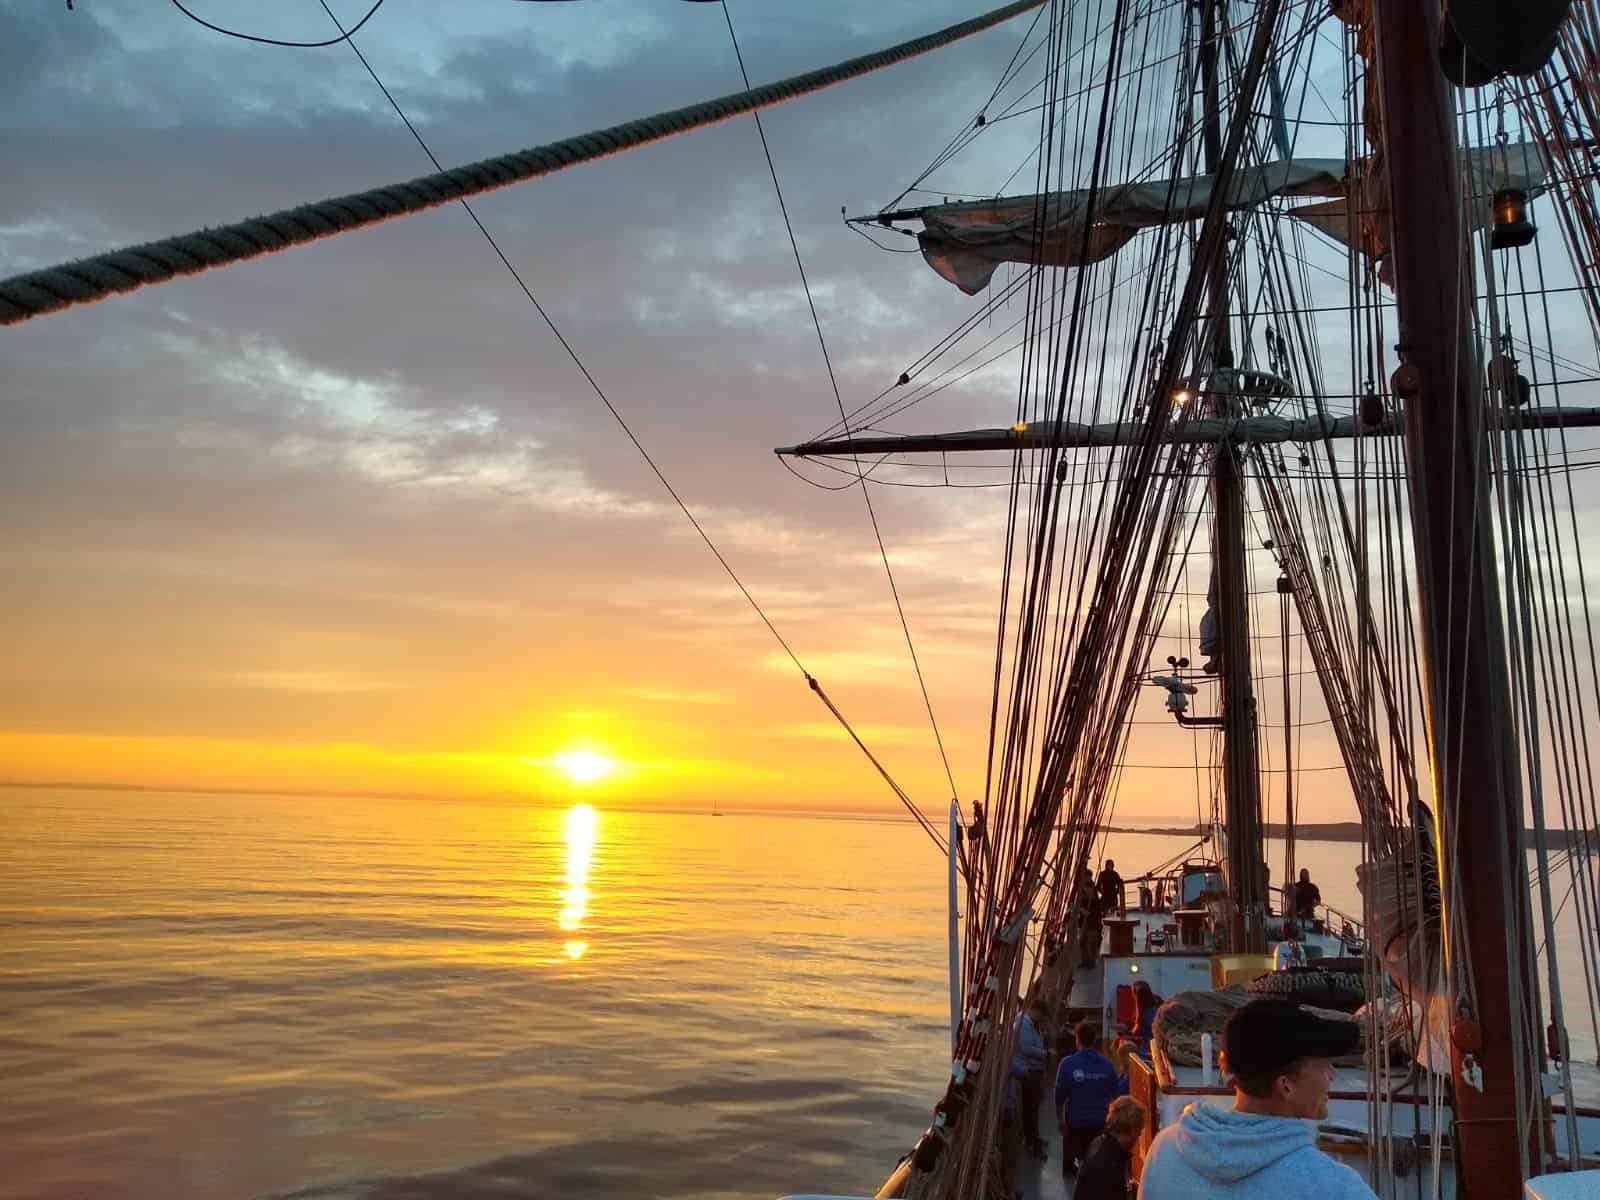 Sunset at anchor Morgenster Jess CLay